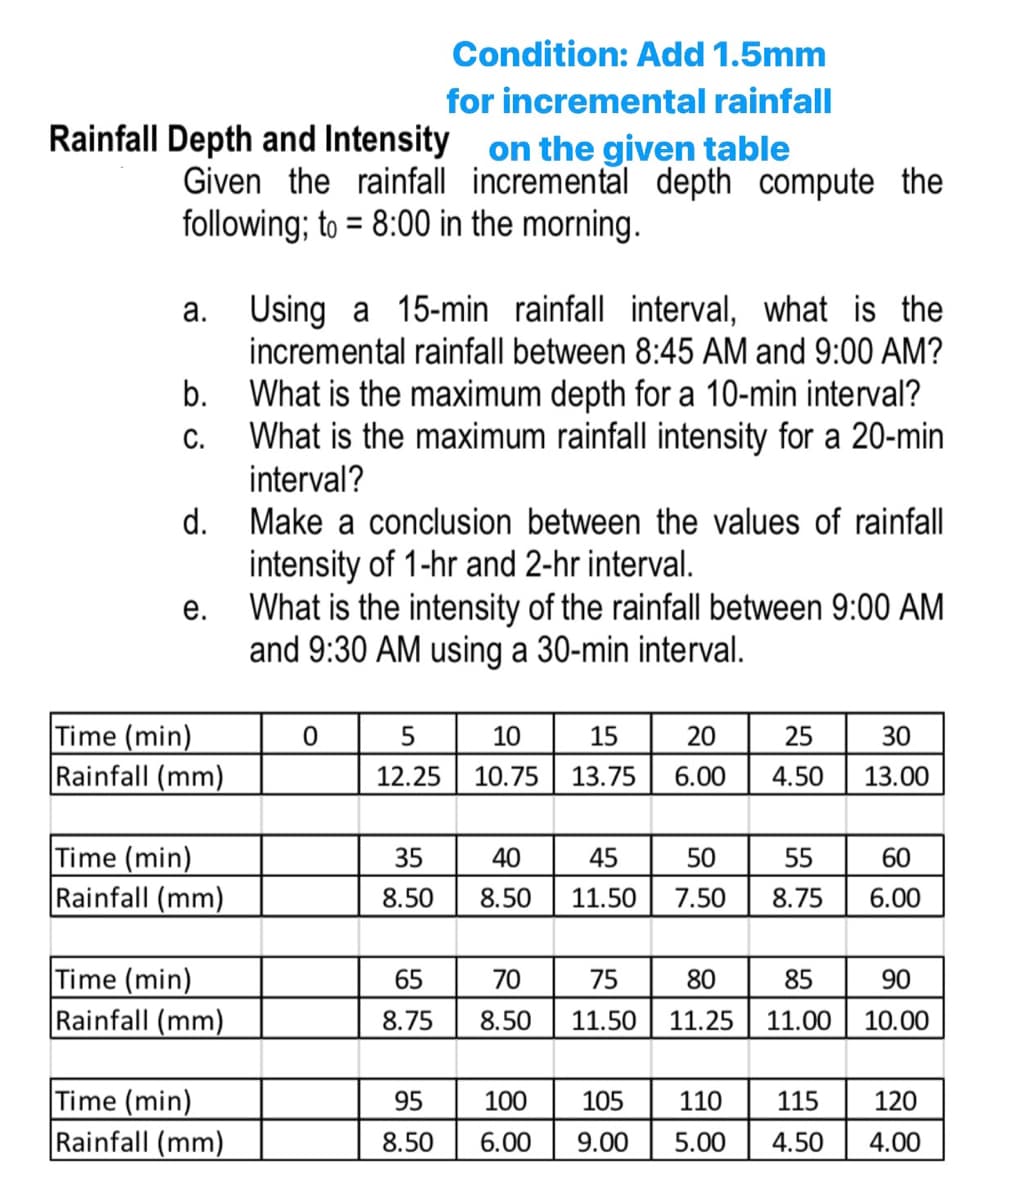 Condition: Add 1.5mm
for incremental rainfall
on the given table
Given the rainfall incremental depth compute the
following; to = 8:00 in the morning.
Rainfall Depth and Intensity
a.
b.
C.
d.
e.
Time (min)
Rainfall (mm)
Time (min)
Rainfall (mm)
Time (min)
Rainfall (mm)
Time (min)
Rainfall (mm)
Using a 15-min rainfall interval, what is the
incremental rainfall between 8:45 AM and 9:00 AM?
What is the maximum depth for a 10-min interval?
What is the maximum rainfall intensity for a 20-min
interval?
Make a conclusion between the values of rainfall
intensity of 1-hr and 2-hr interval.
What is the intensity of the rainfall between 9:00 AM
and 9:30 AM using a 30-min interval.
0
5
12.25
35
8.50
65
8.75
95
8.50
10
10.75
40
8.50
70
8.50
15
13.75
20
6.00
45
50
11.50 7.50
75
11.50
80
11.25
25
4.50
100
6.00 9.00 5.00
55
8.75
85
11.00
105 110 115
4.50
30
13.00
60
6.00
90
10.00
120
4.00